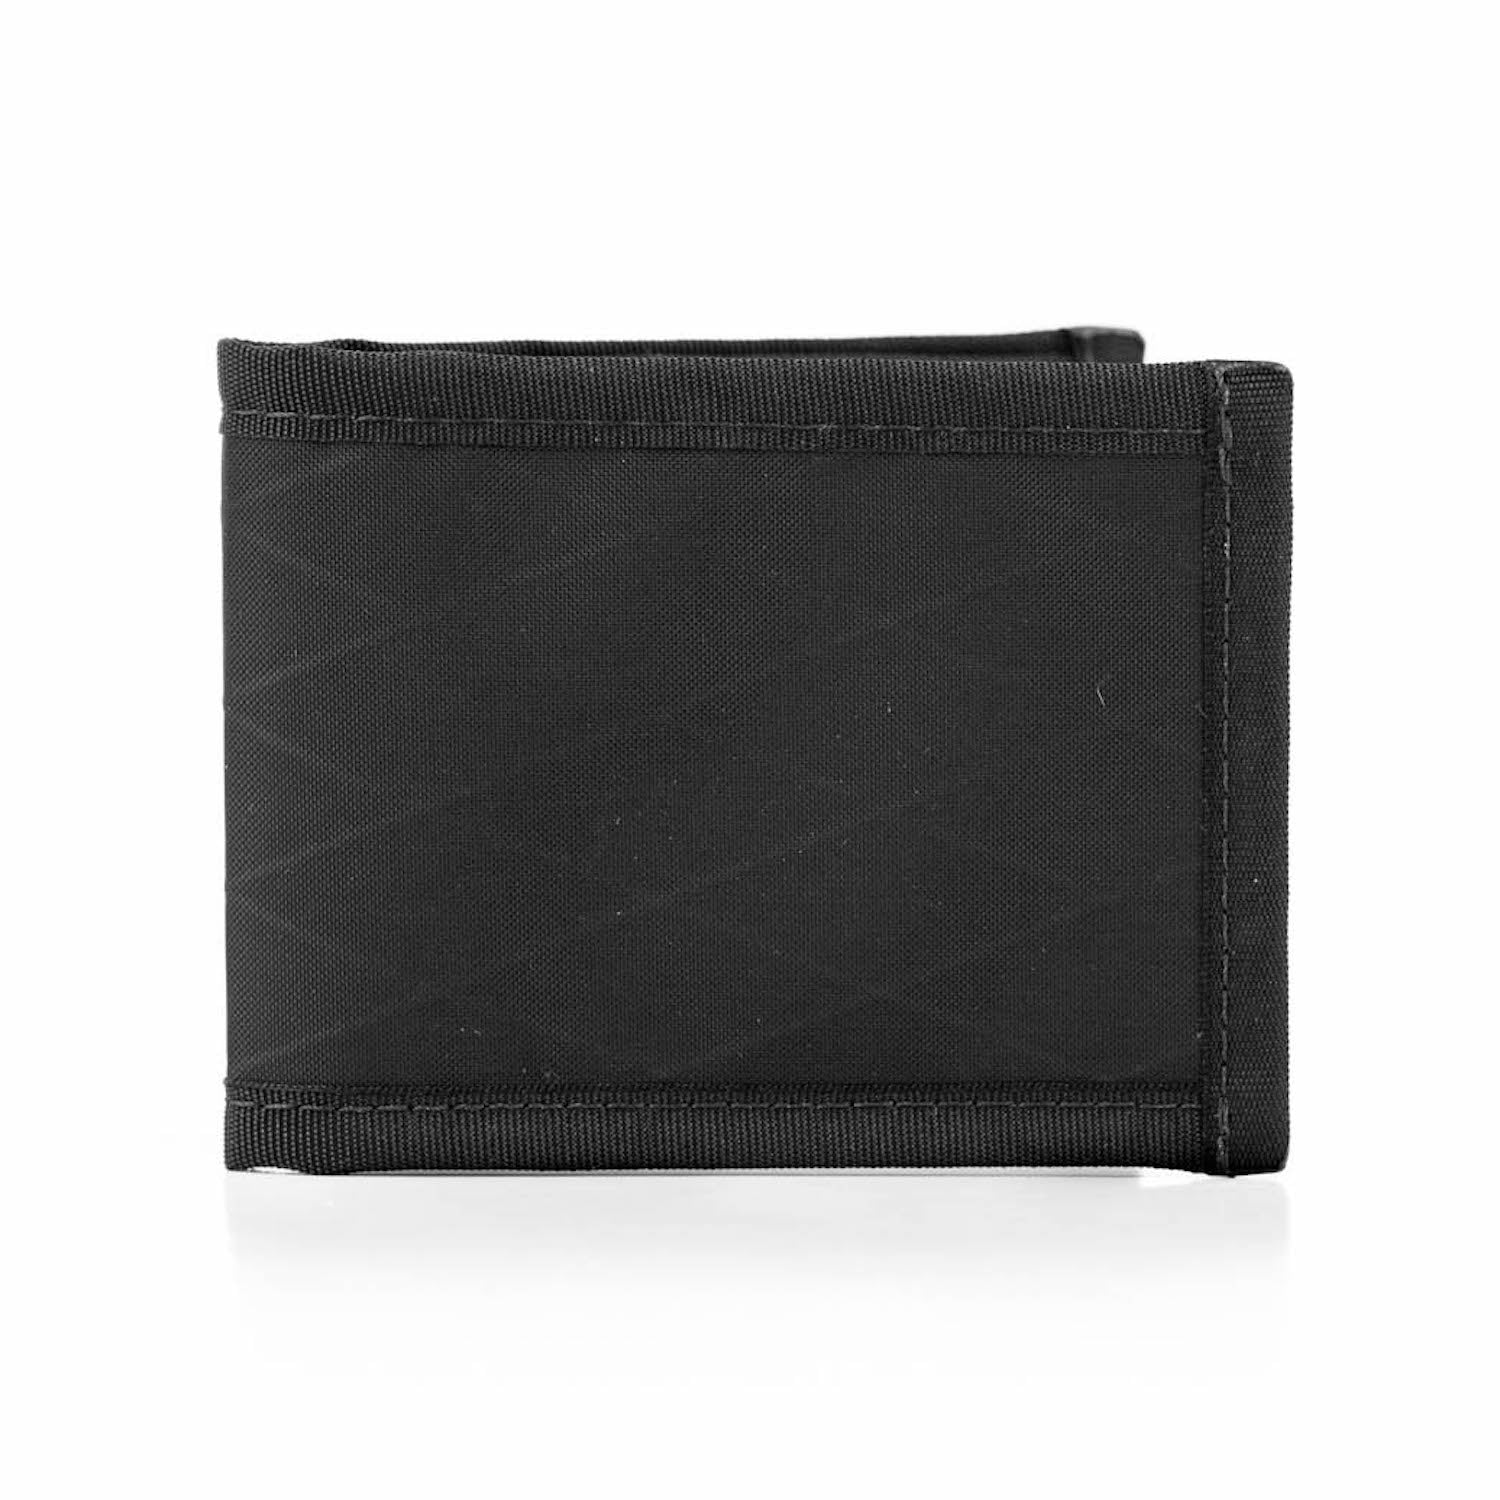 Minimalist Wallets + RFID Made in USA of Recycled Sailcloth – Flowfold